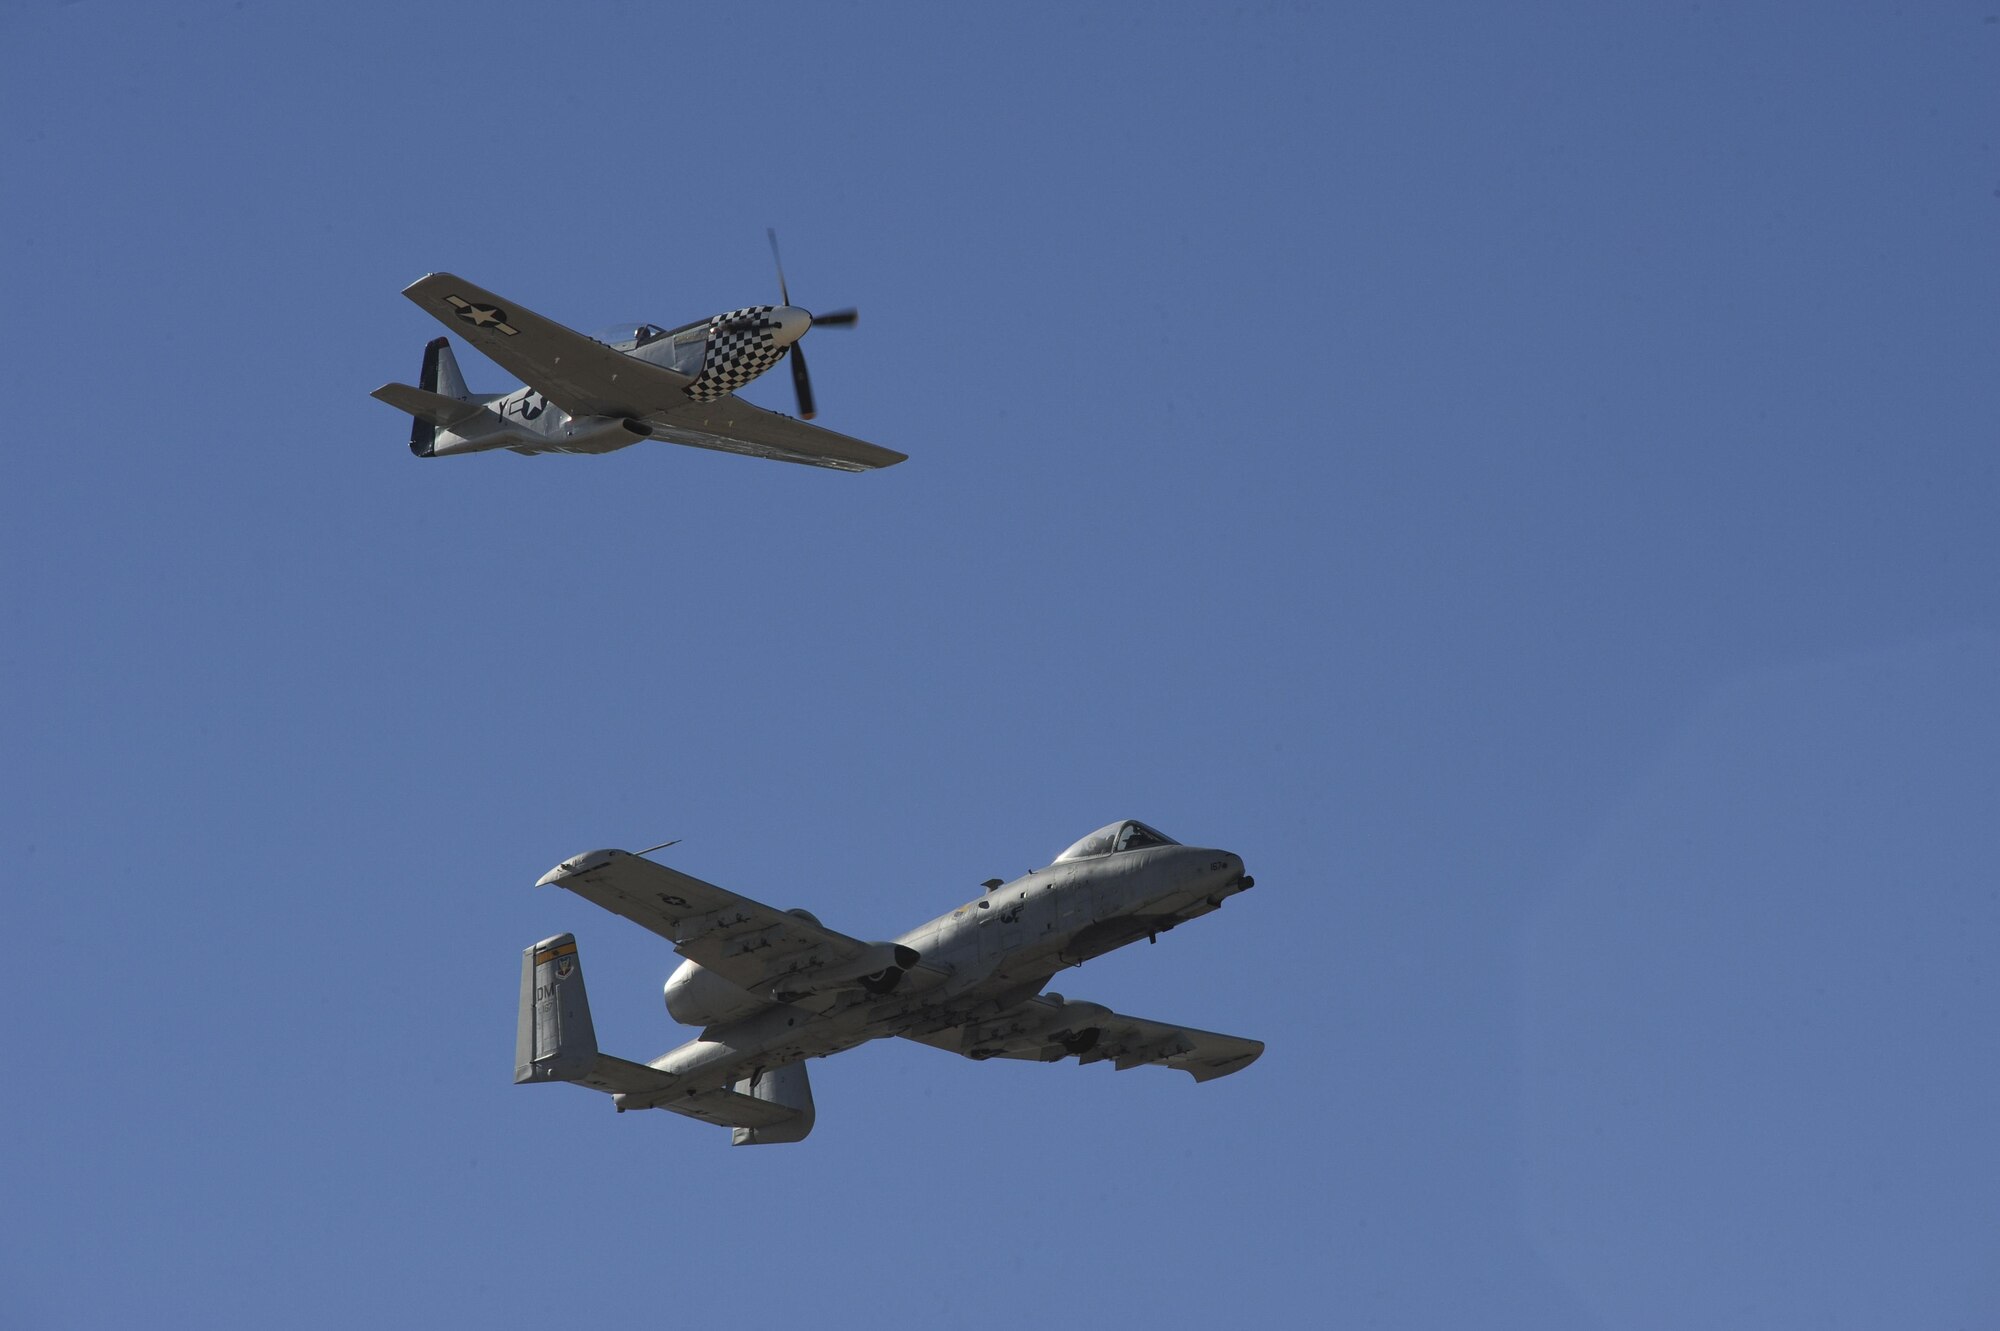 A P-51 Mustang and U.S. Air Force A-10C Thunderbolt II fly in formation during the 2017 Heritage Flight Training and Certification Course at Davis-Monthan Air Force Base, Ariz., Feb., 10, 2017. Established in 1997, the HFTCC certifies civilian pilots of historic military aircraft and U.S. Air Force pilots to fly in formation together during the upcoming air show season. (U.S. Air Force photo by Senior Airman Ashley N. Steffen)